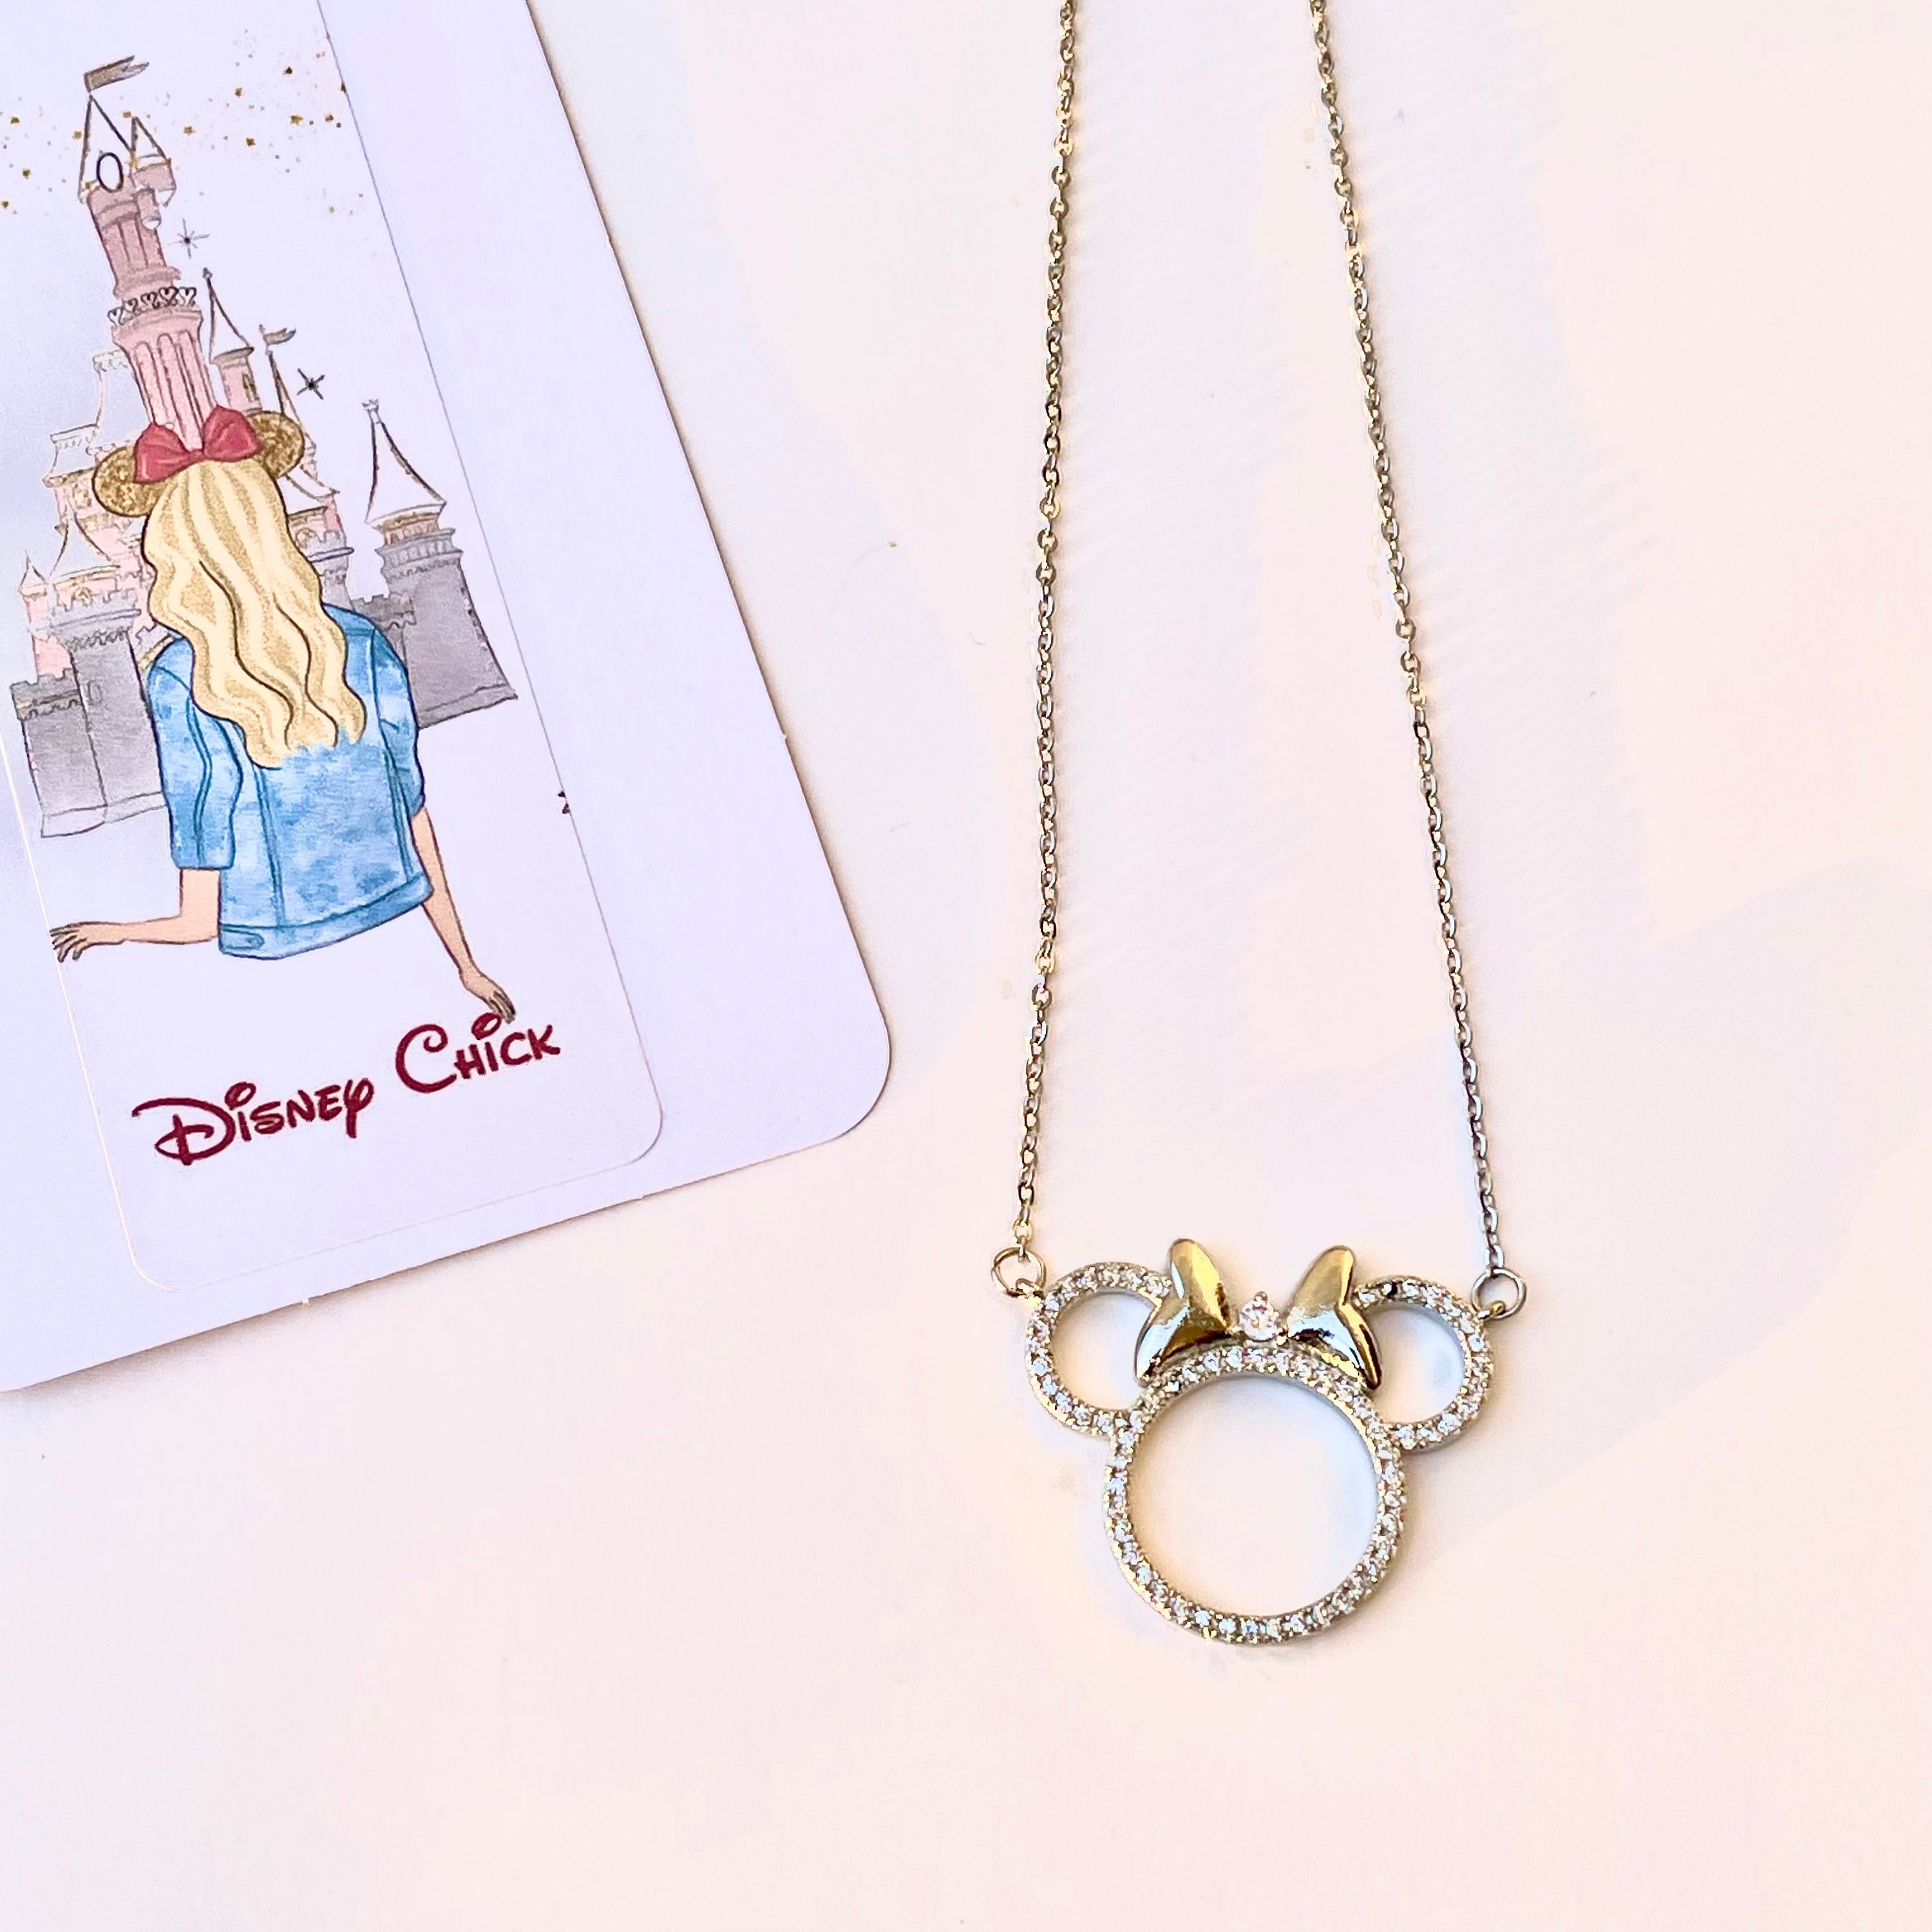 Minnie Mouse Snow Angel Homestead Necklace by BaubleBar | Disney Store